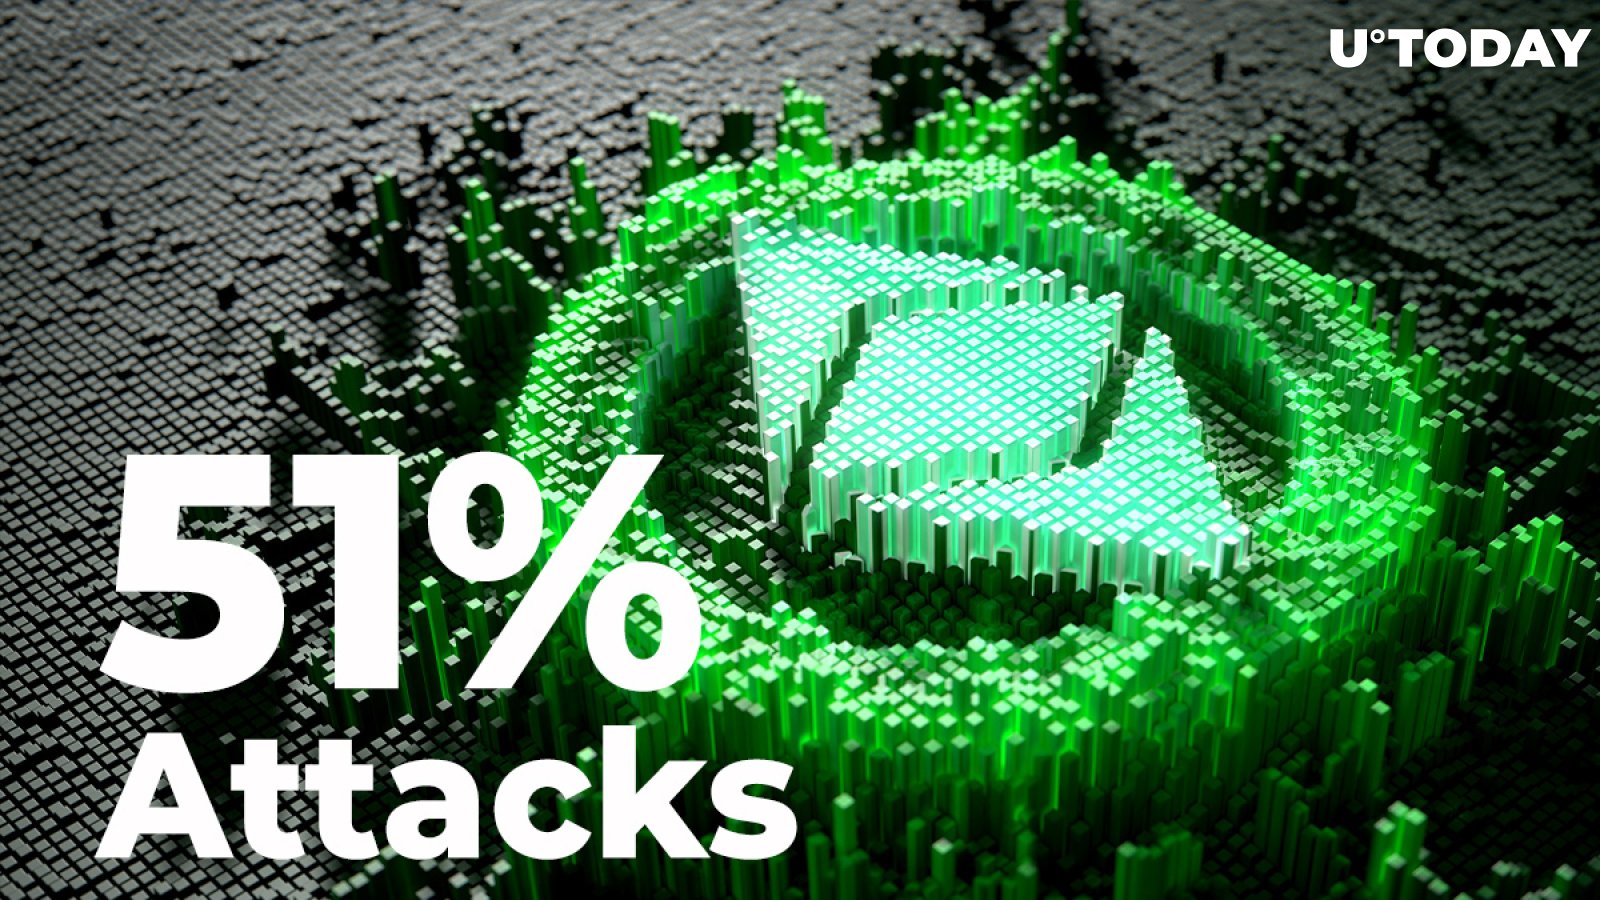 Ethereum Classic (ETC) Sees Another 51 Percent Attack as Developers Scrambling to Secure Blockchain